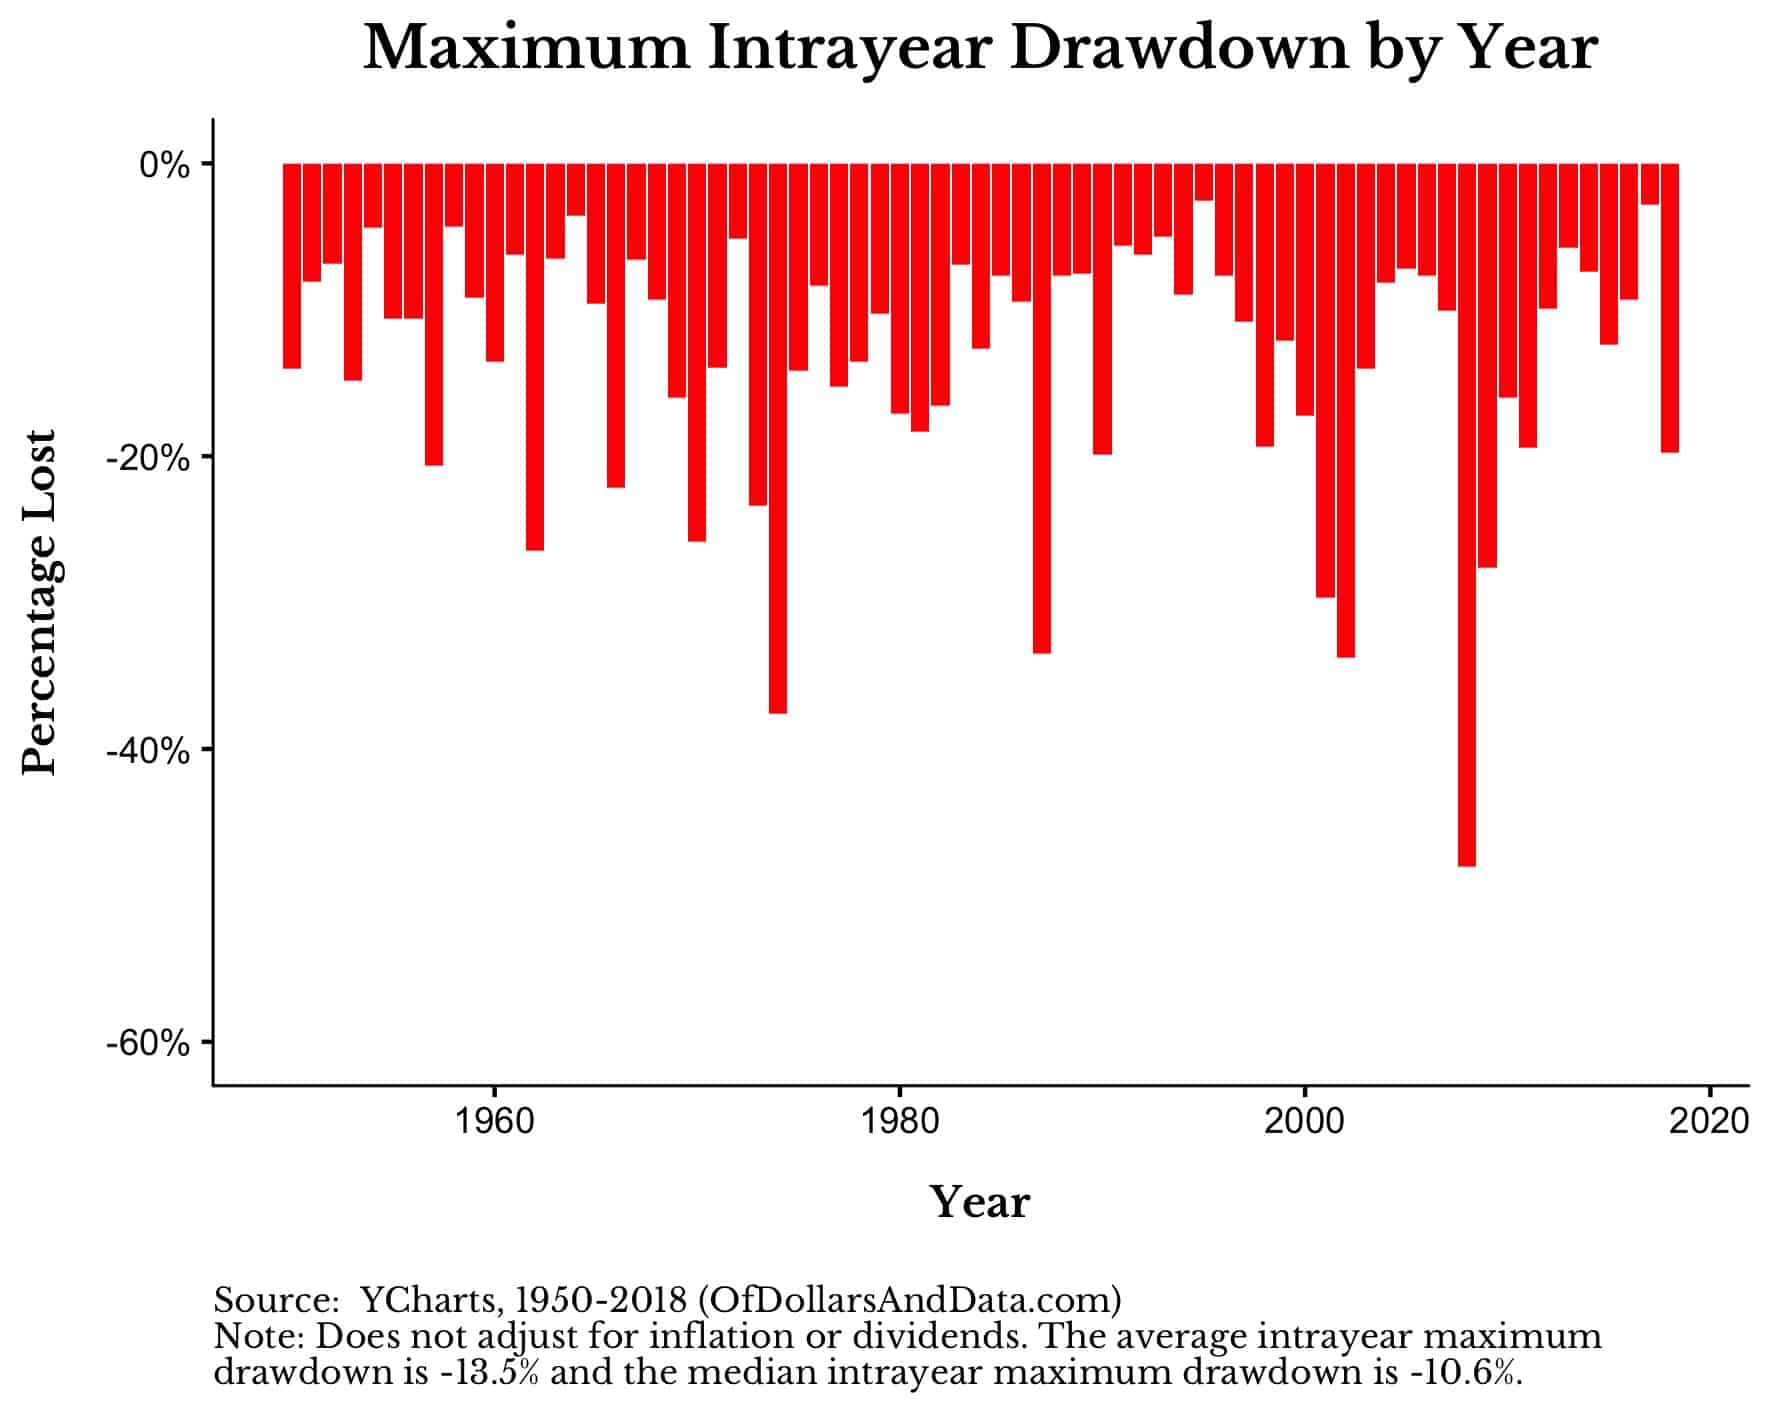 annual intrayear drawdowns of the S&P 500 since 1950